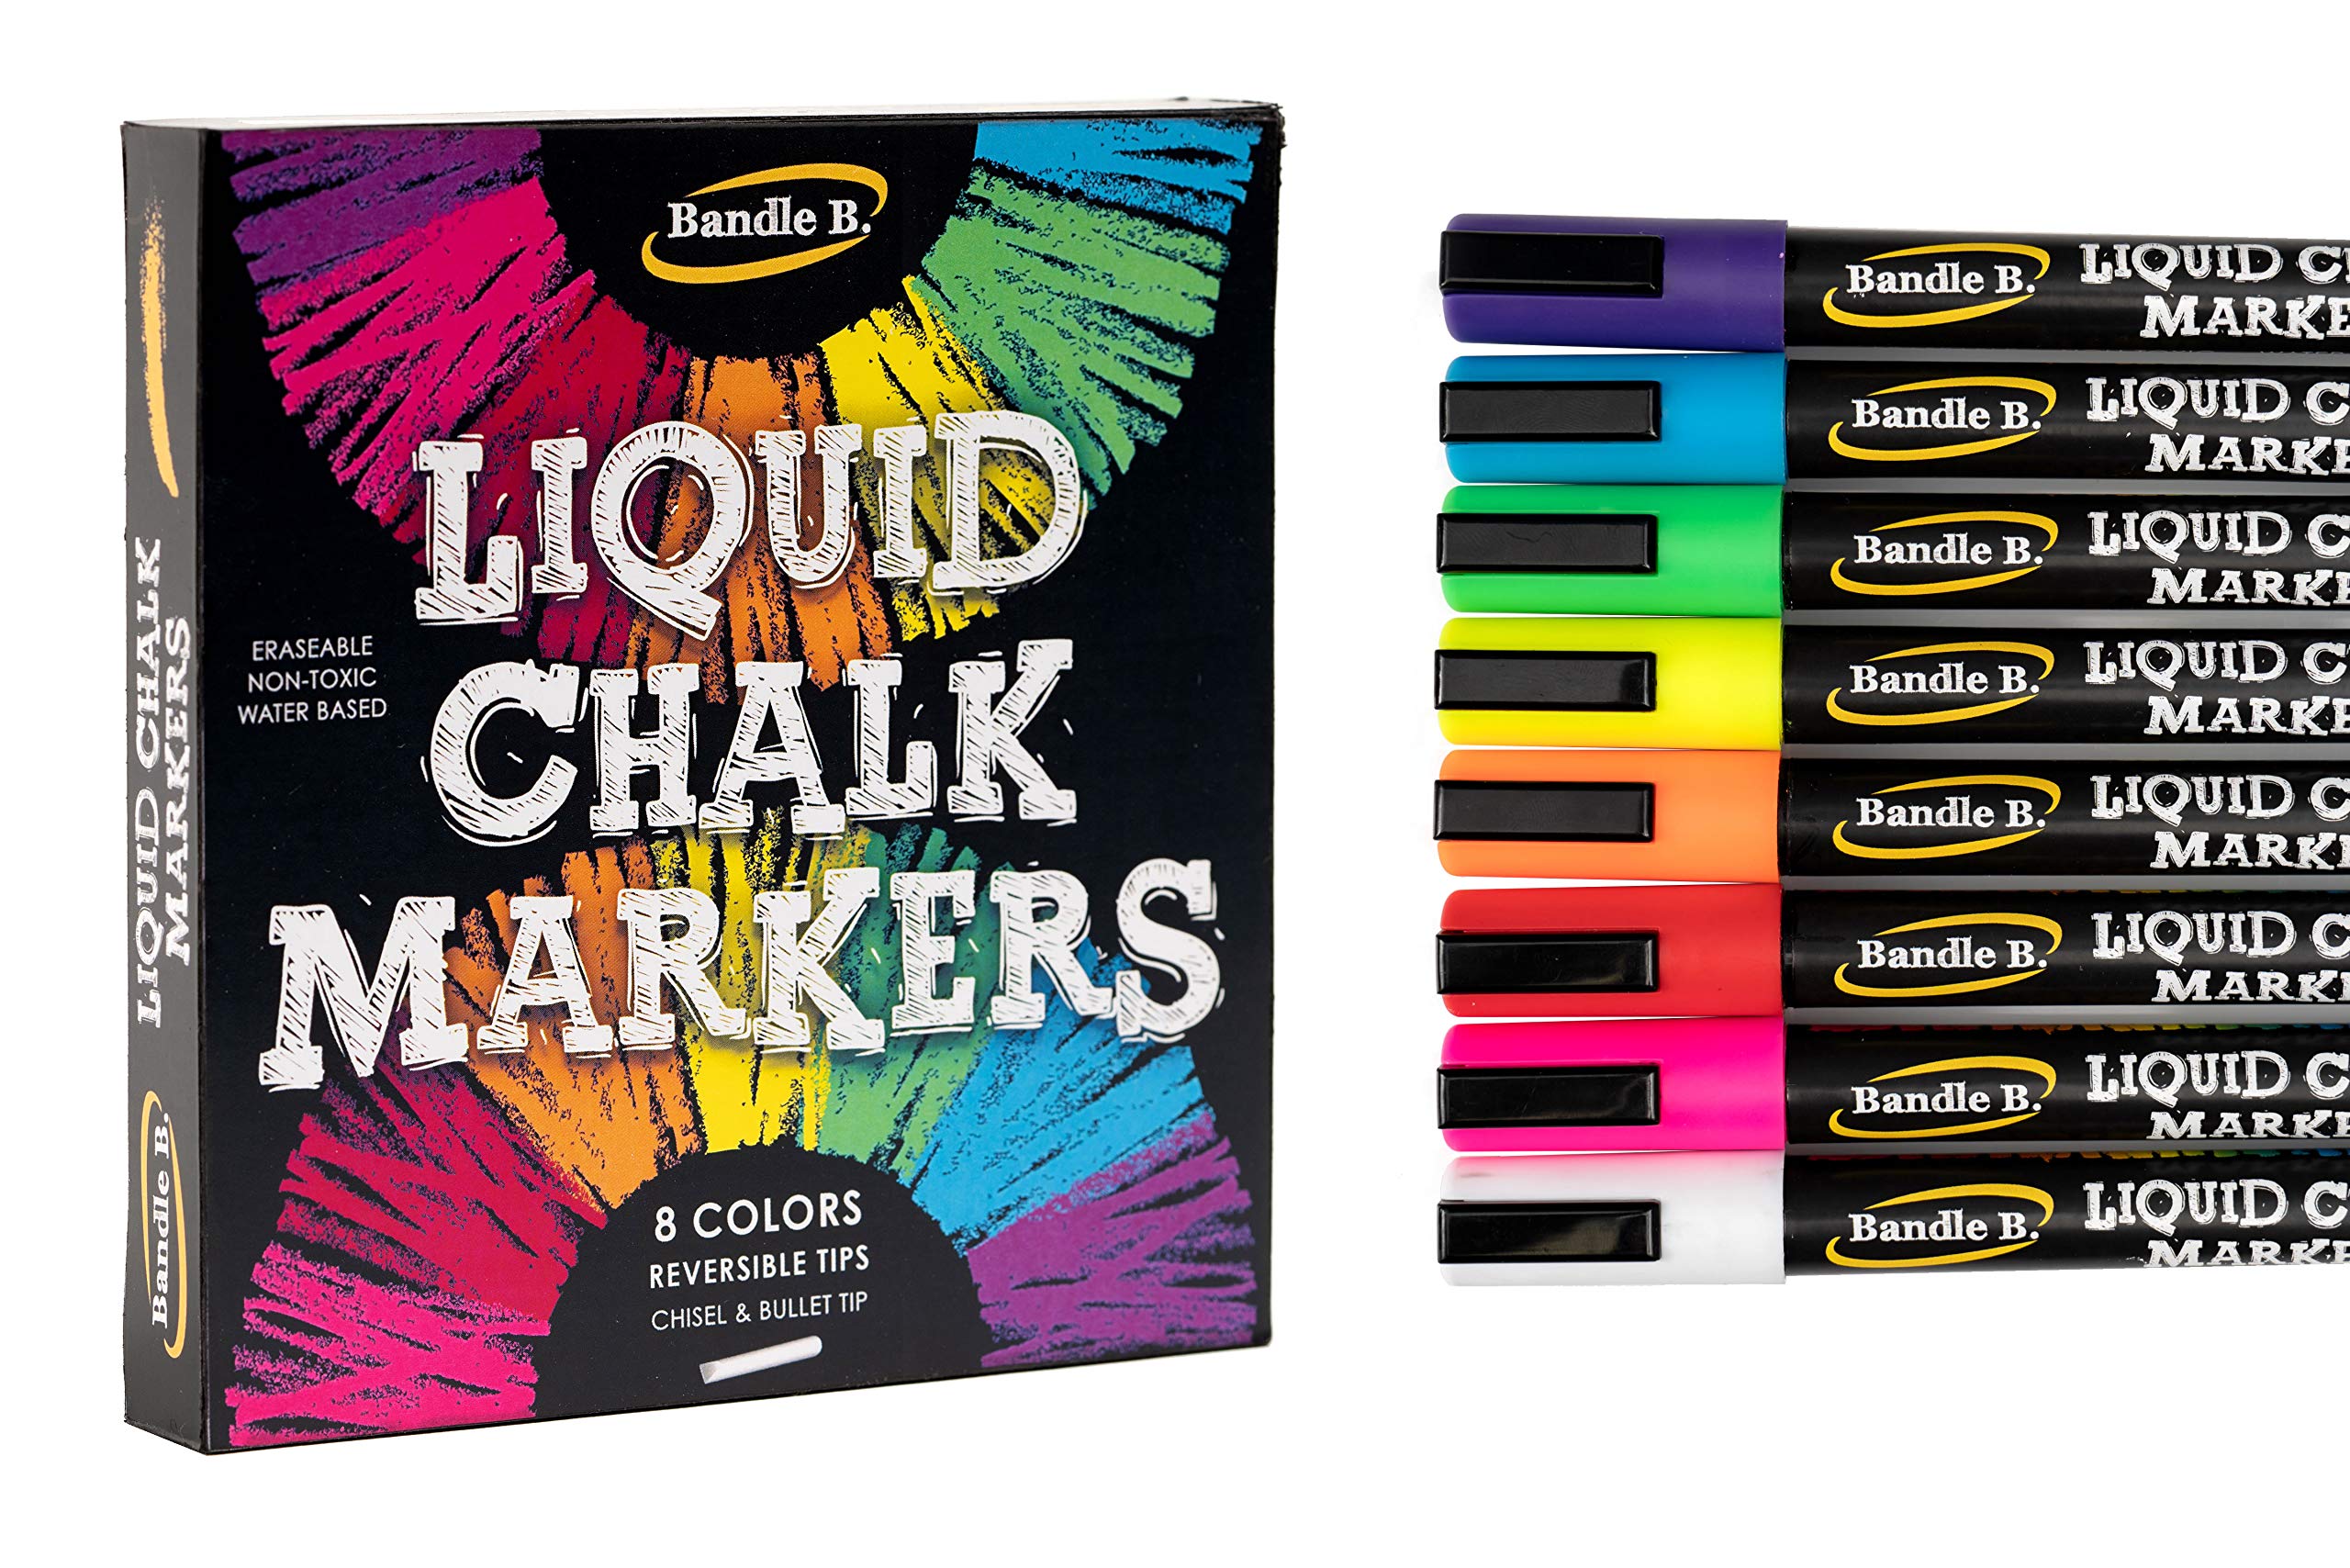 Chalk Markers - 8 Vibrant Colors, Erasable, Non-Toxic, Water-Based,  Reversible Tips, Bright Colors For Kids & Adults for Glass or Chalkboard  Markers for Businesses, Restaurants, or Use Liquid Chalk Markers on Any